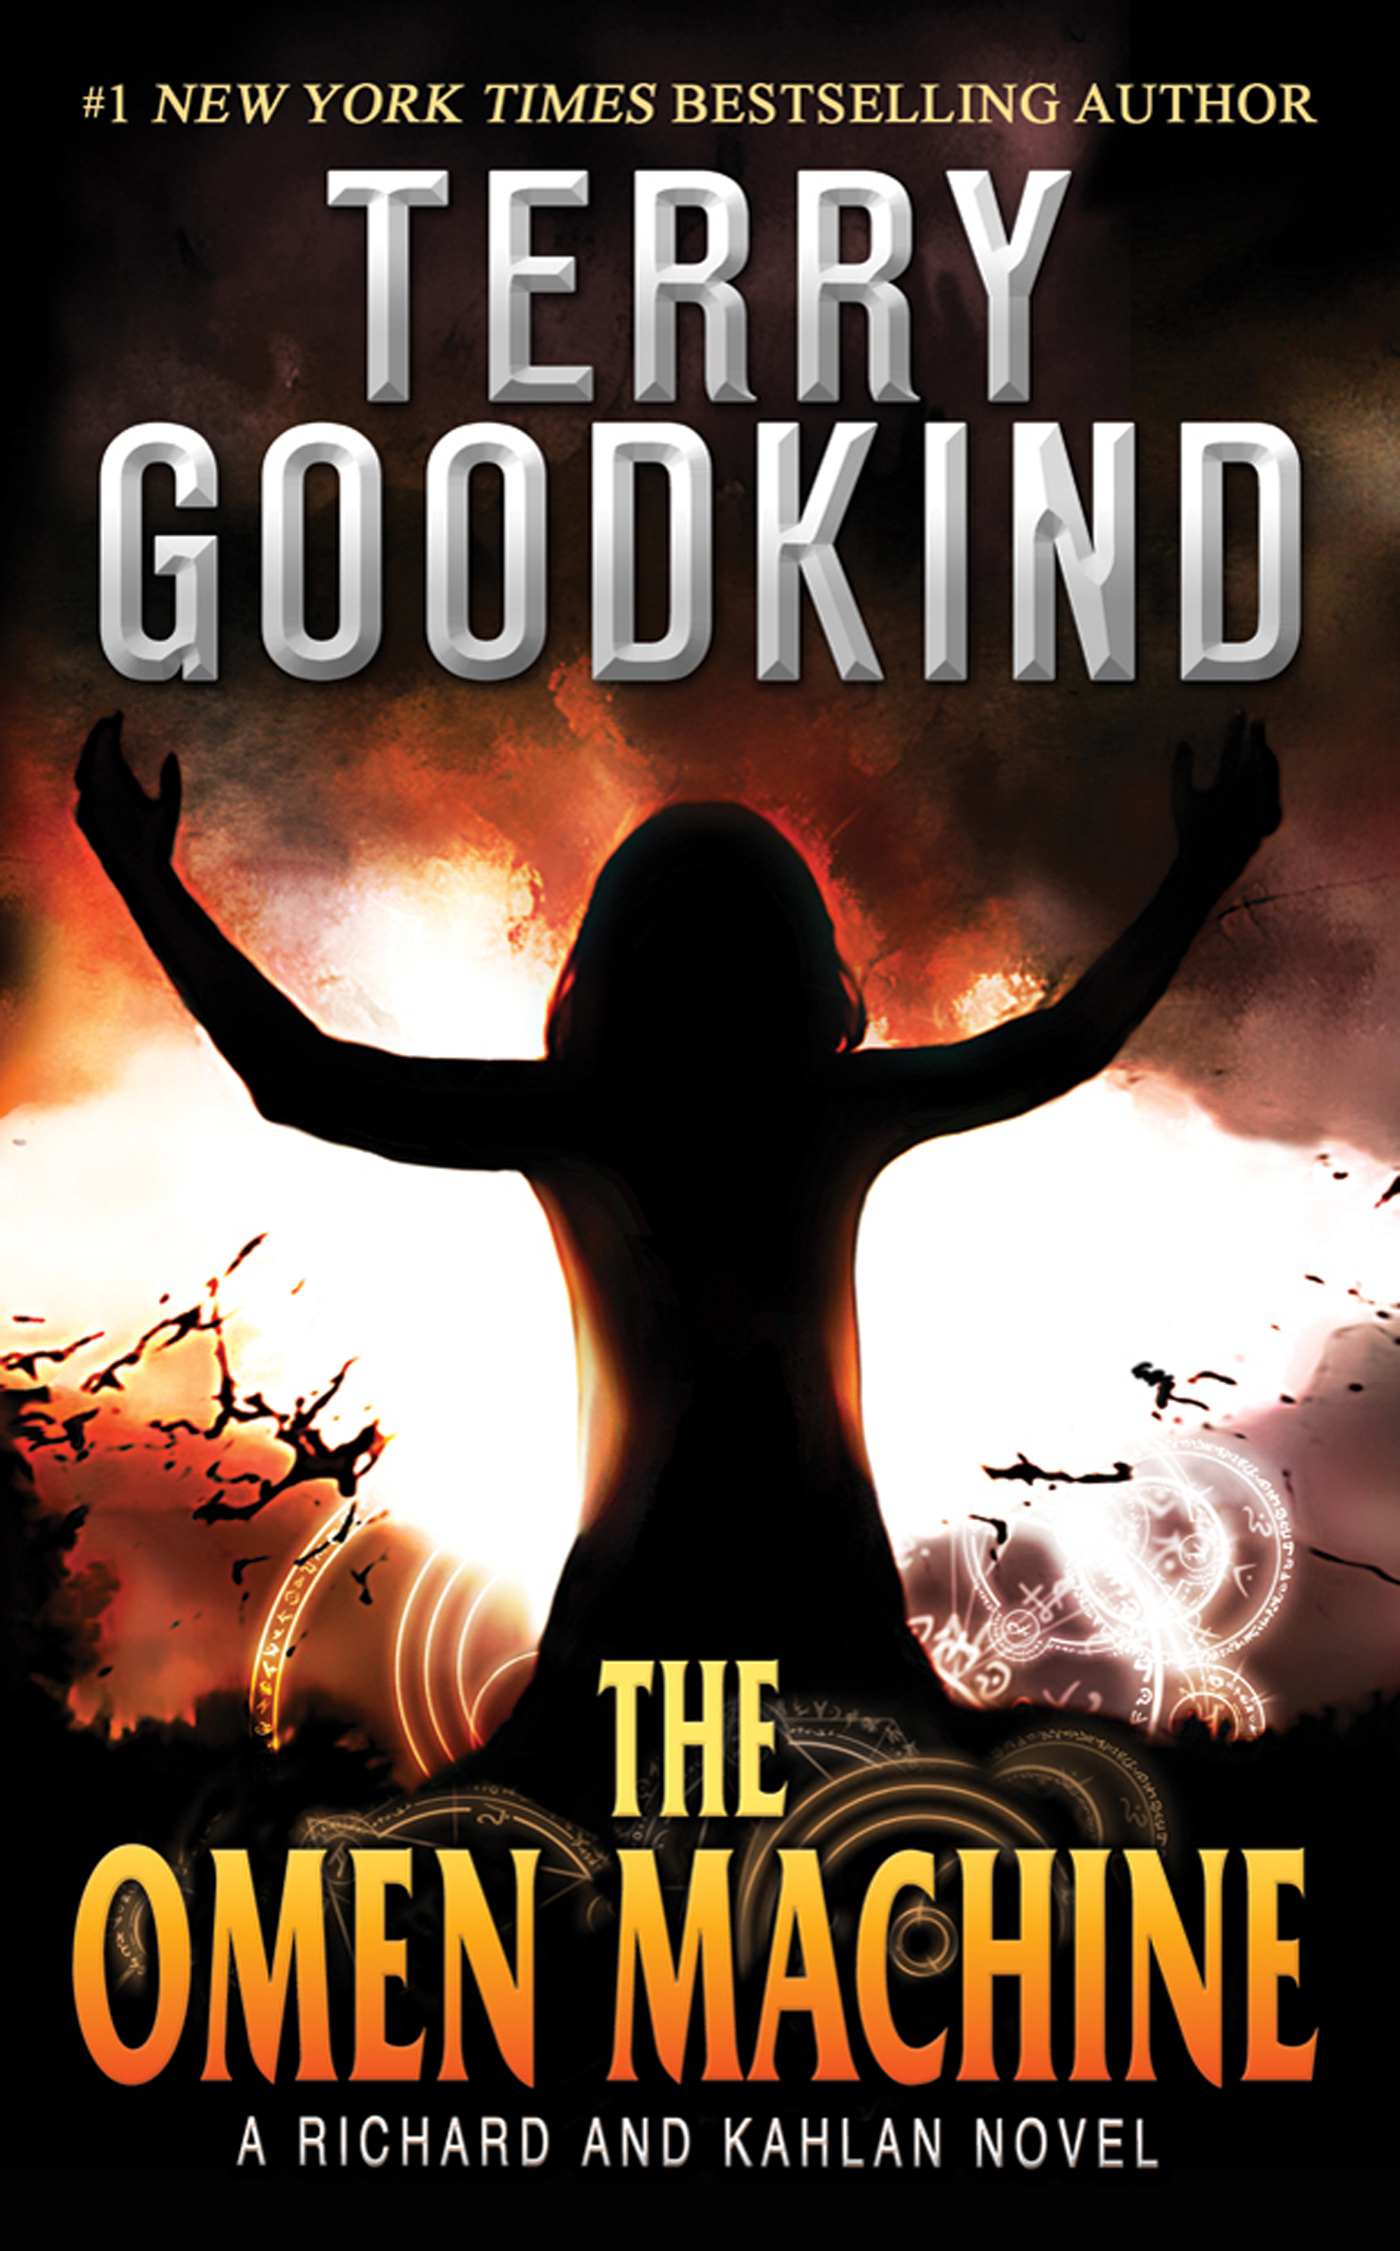 The Omen Machine : A Richard and Kahlan Novel by Terry Goodkind